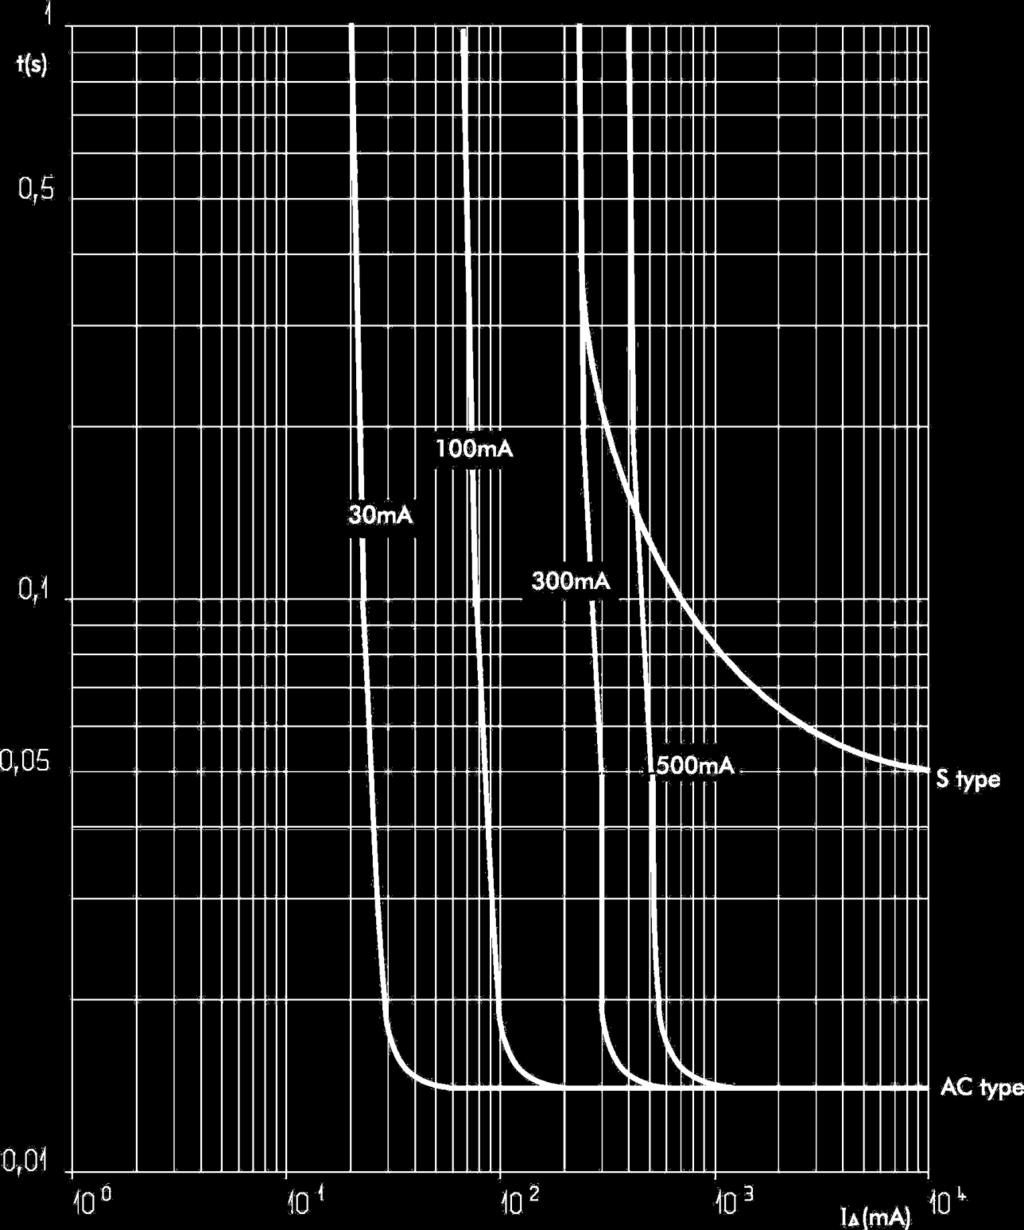 Tripping time curve